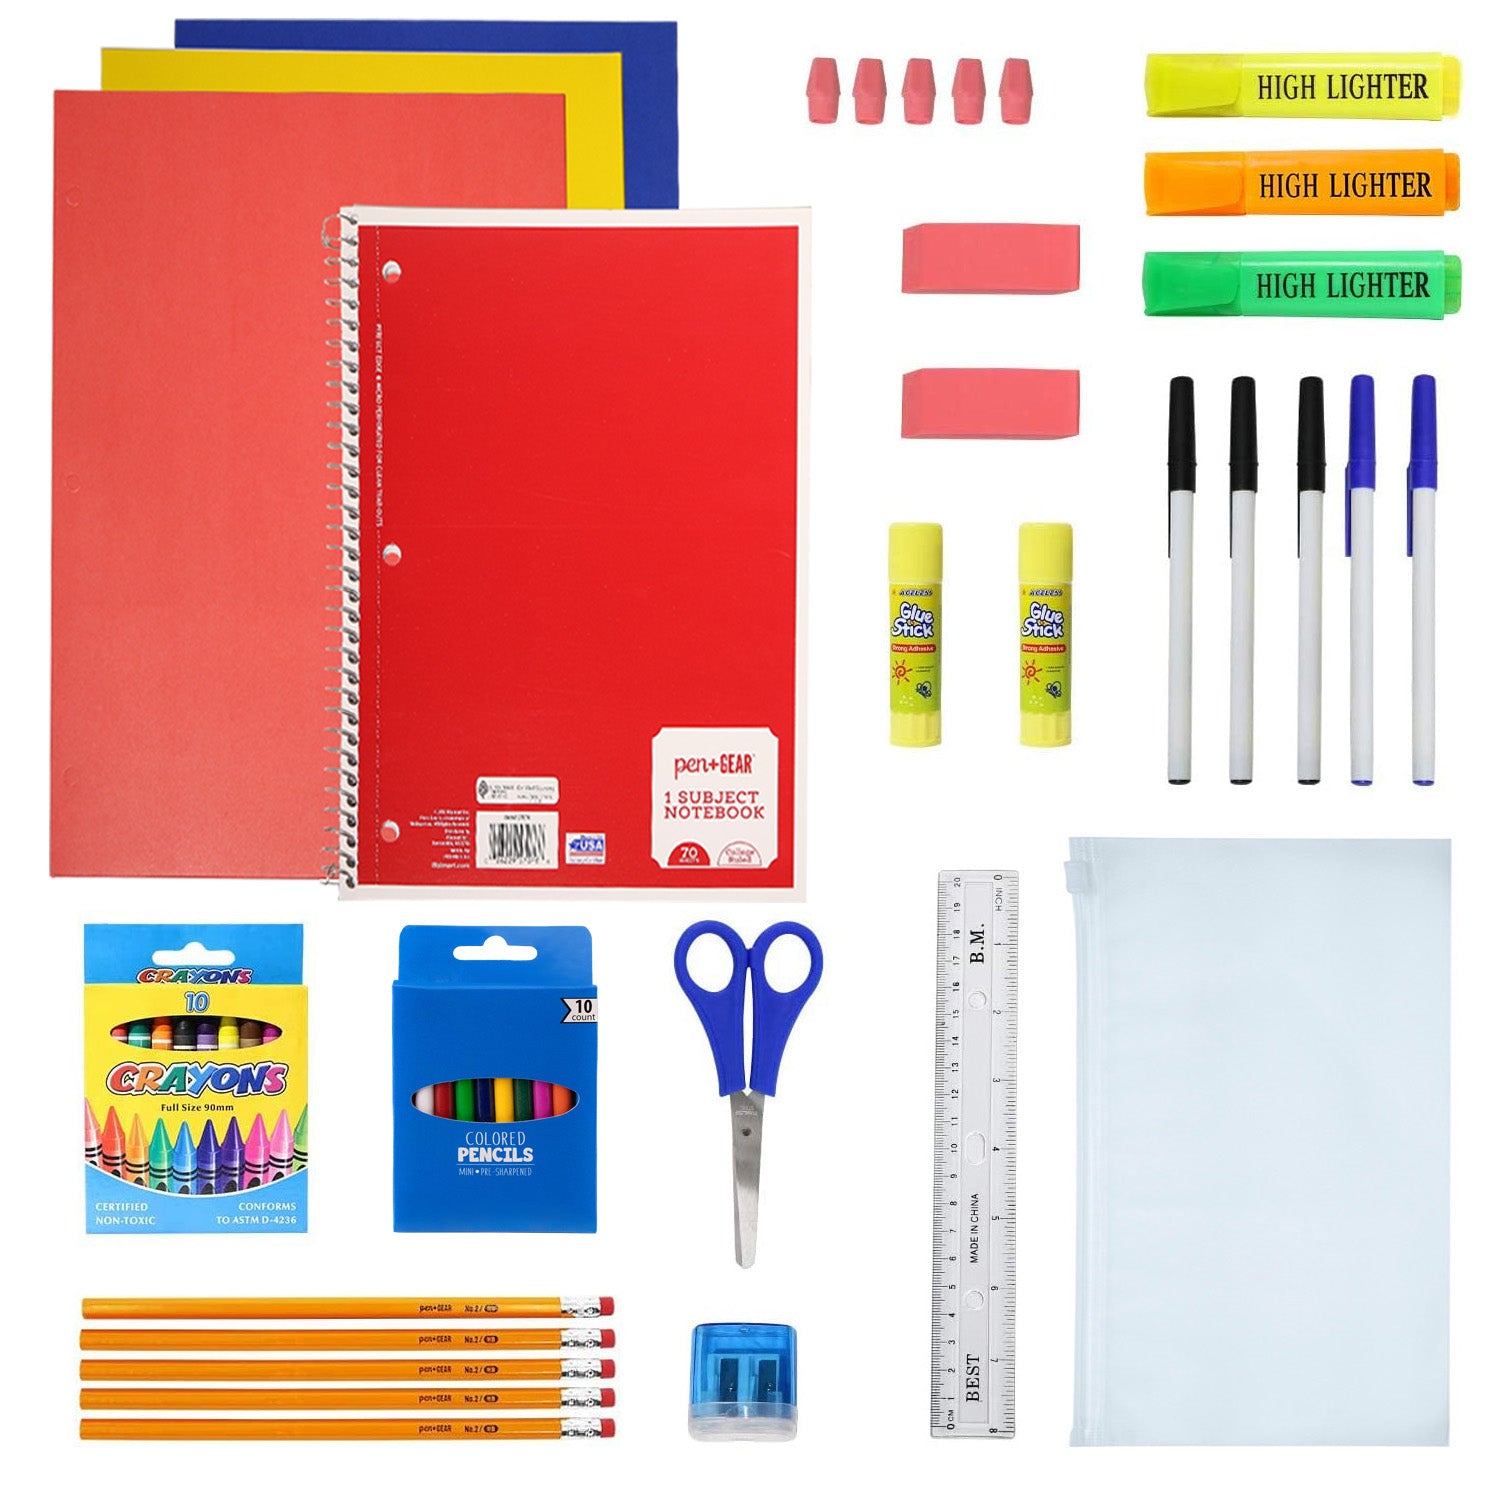 50 Piece Wholesale Basic School Supply Kit With 17" Backpack - Bulk Case of 12 Backpacks and Kits